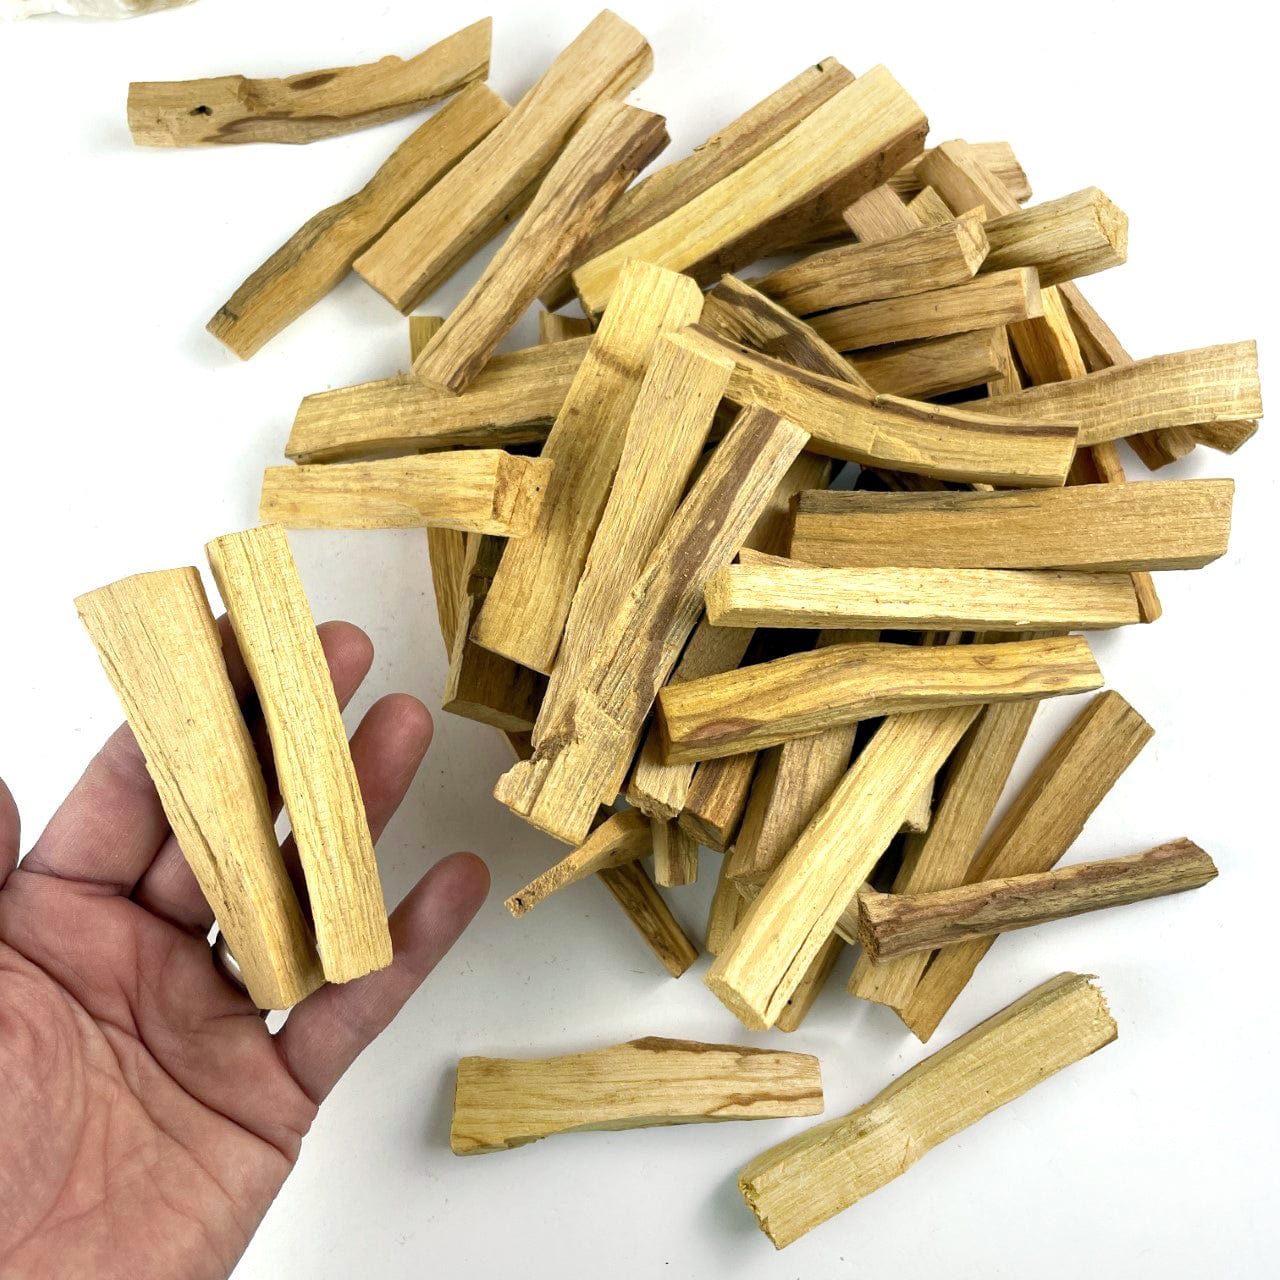 A pile of palo santo sticks and two held in a hand.